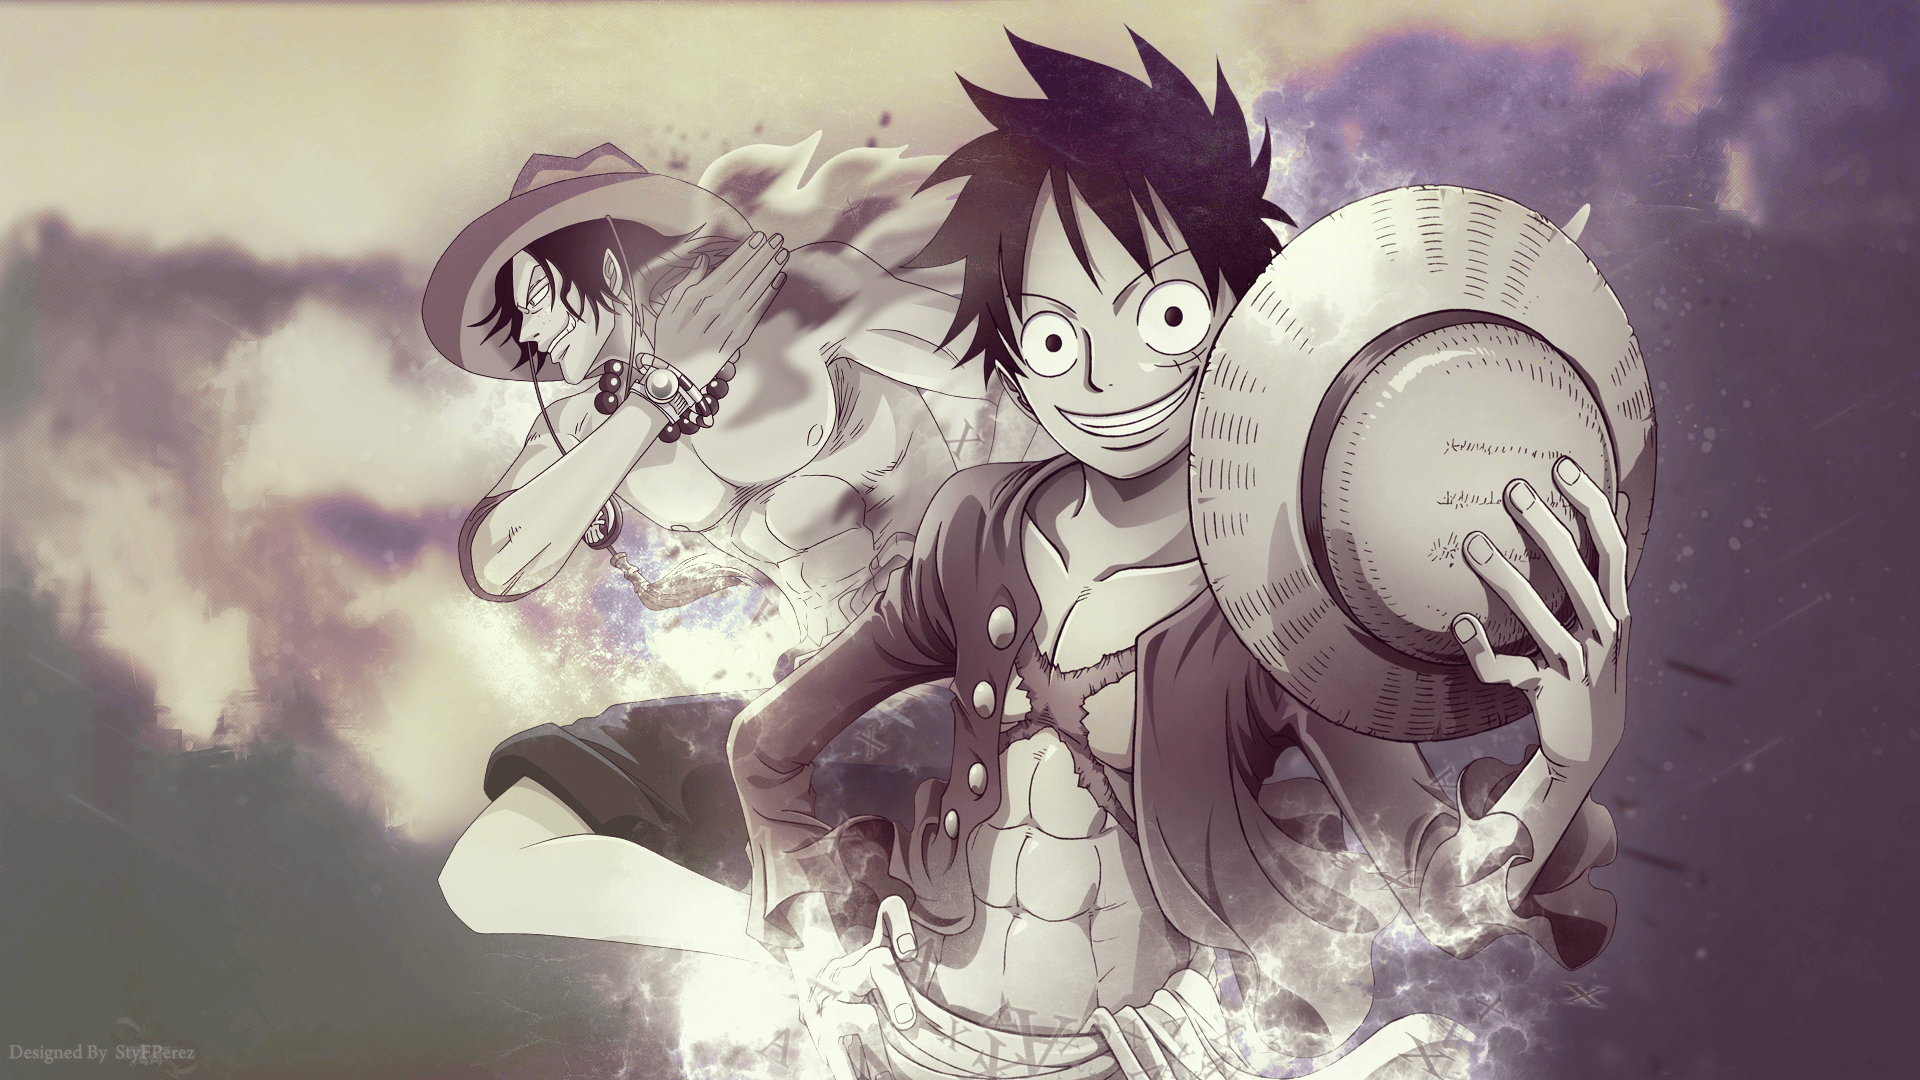 Luffy Ace Sabo Wallpapers - Wallpaper Cave